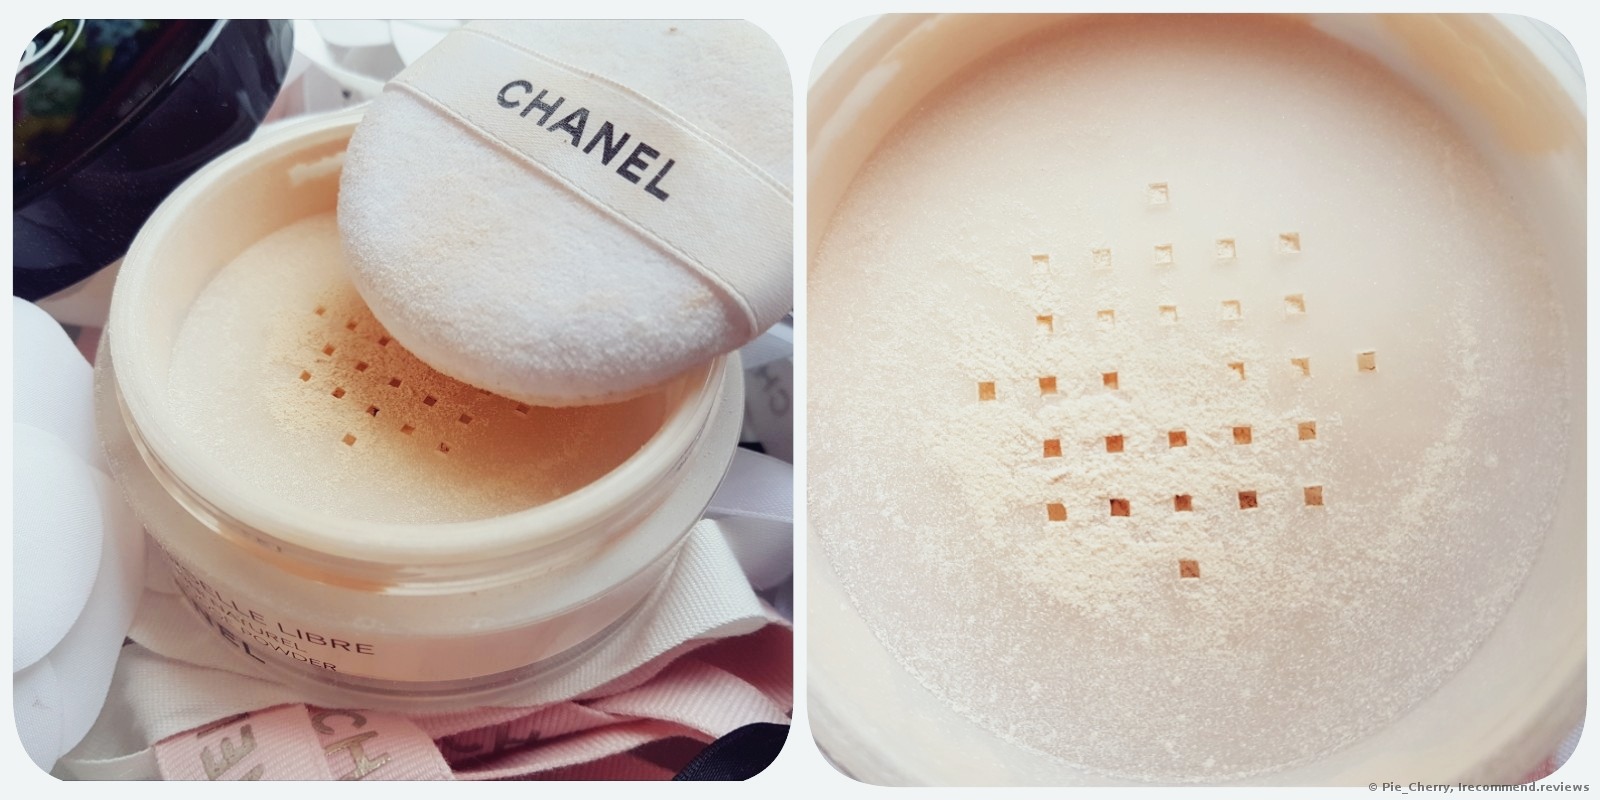 Chanel Poudre Universelle Libre Natural Finish Loose Powder - «Ideal… It's  hard to fault. Photos of the product on my skin are HERE!!!»